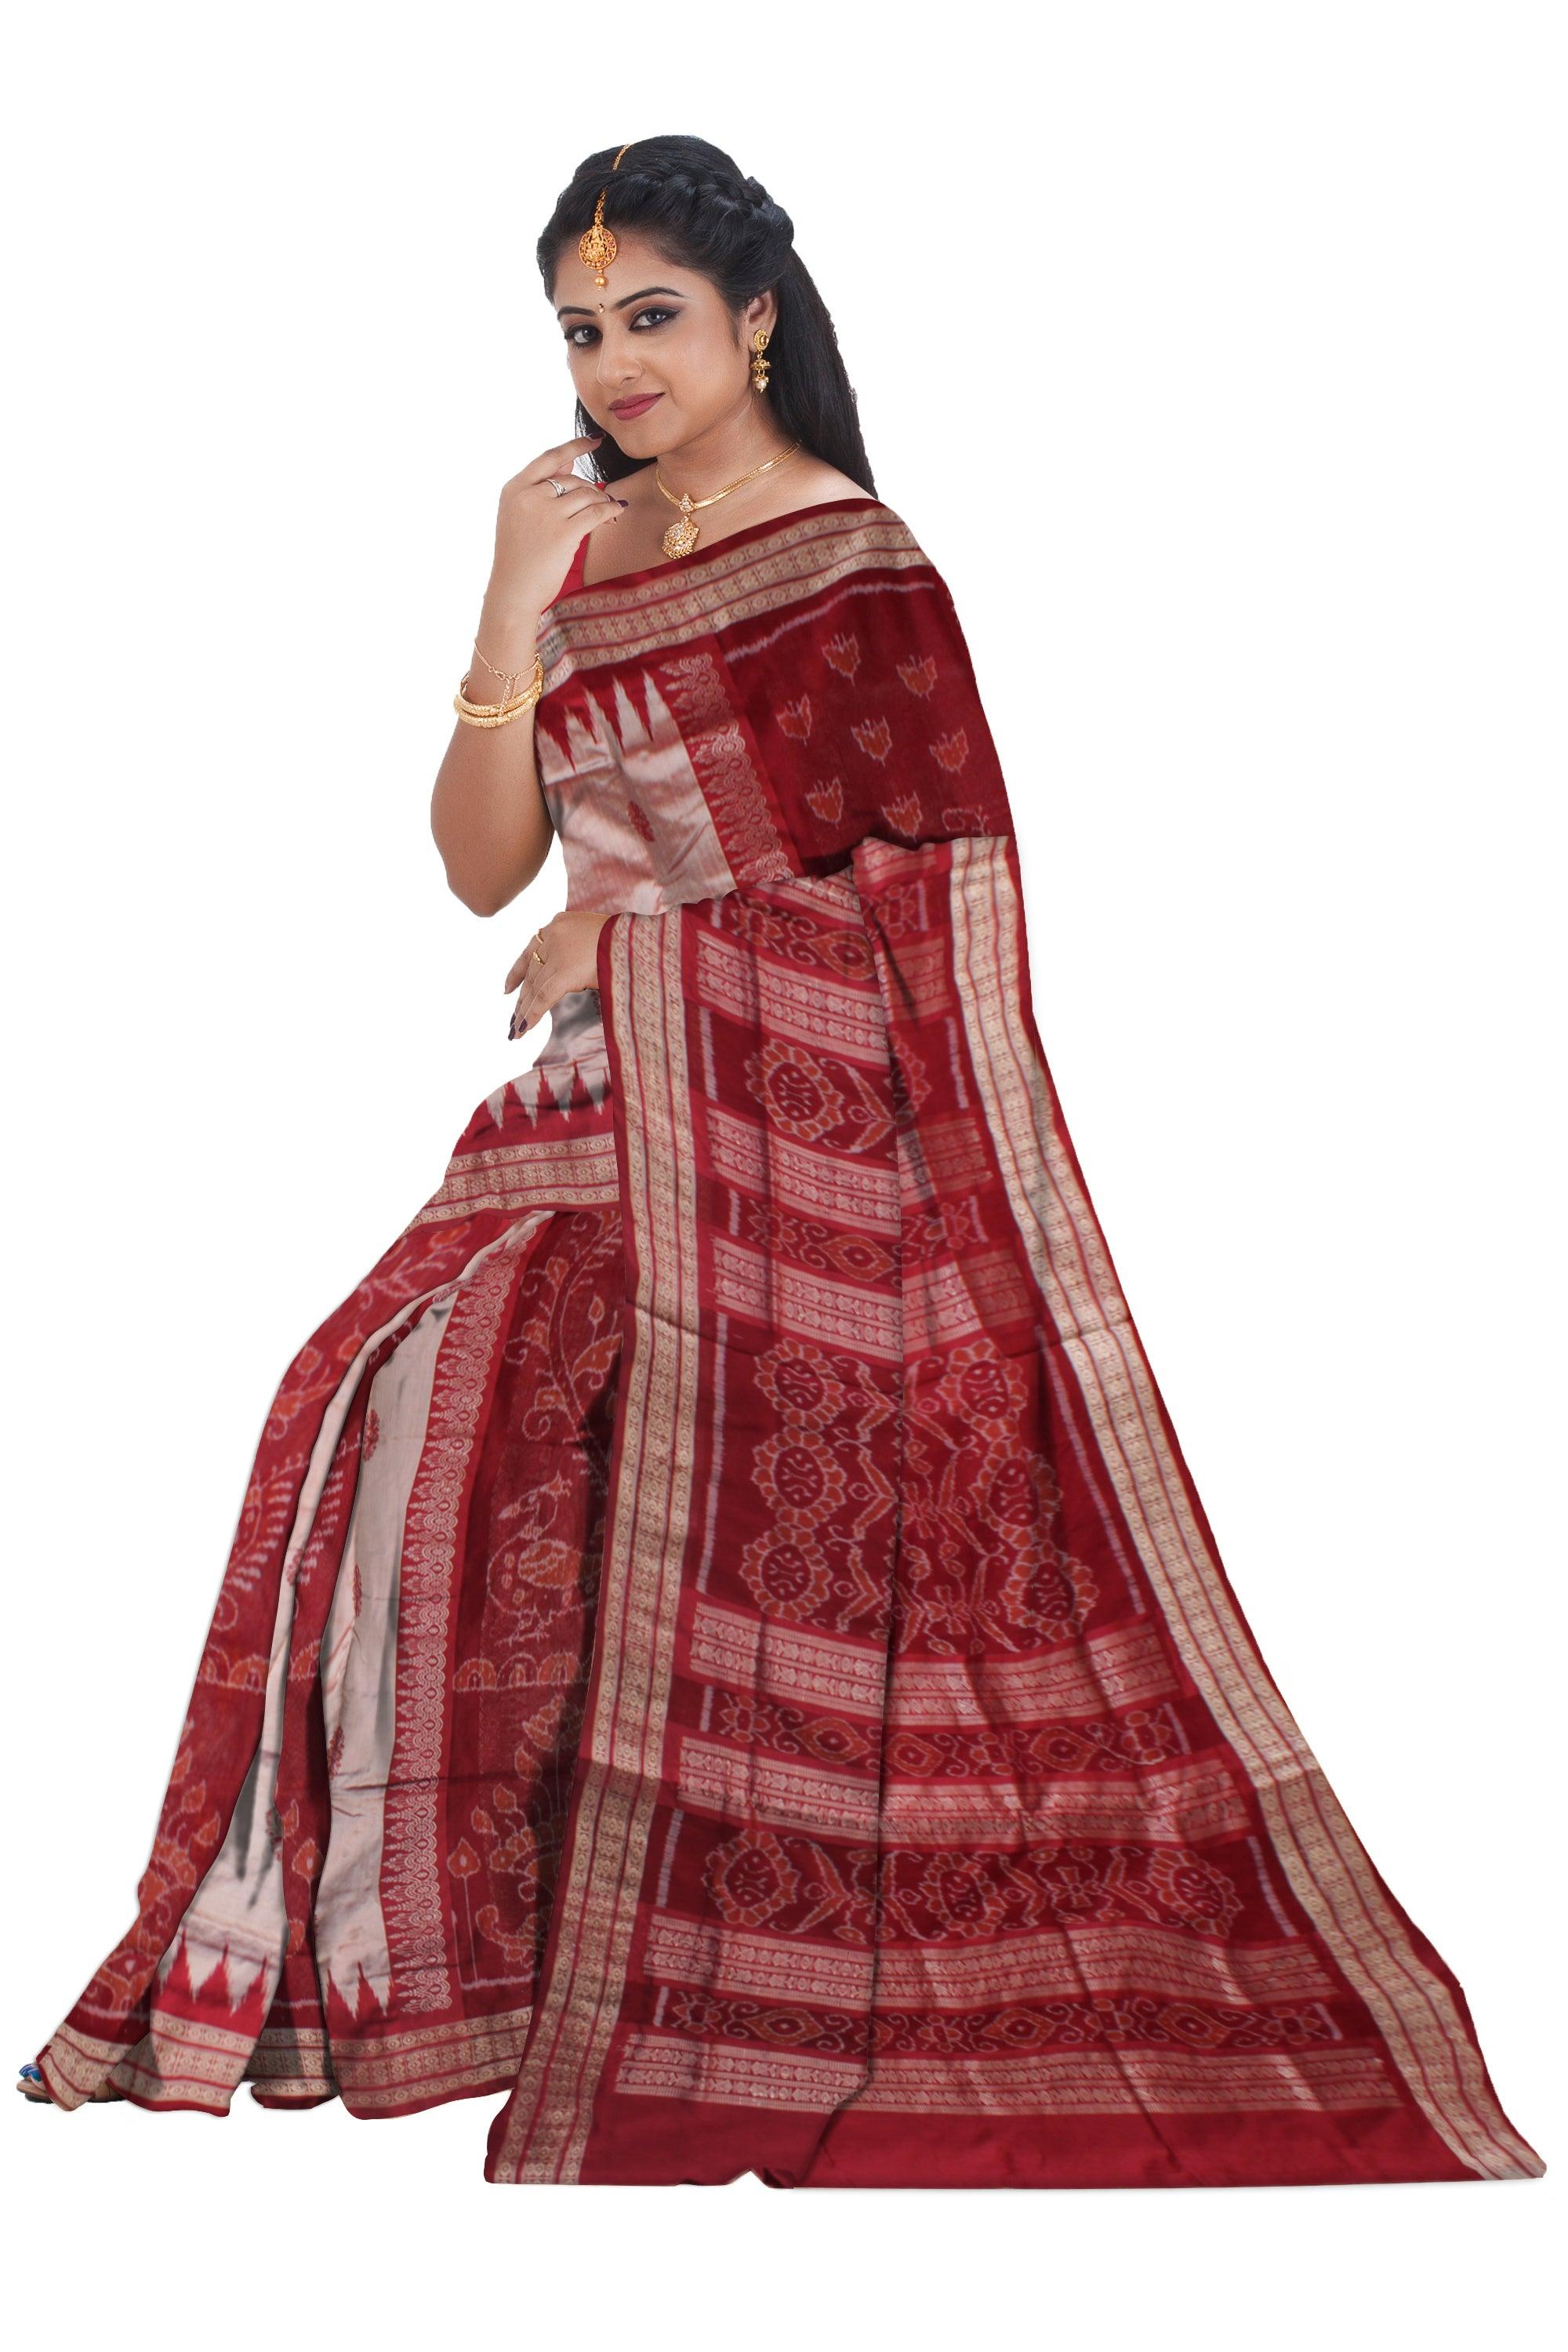 PEACOCK PRINT BOMKEI PATTERN PATA SAREE IS SILVER AND MAROON COLOR BASE,COMES WITH MATCHING BLOUSE PIECE. - Koshali Arts & Crafts Enterprise